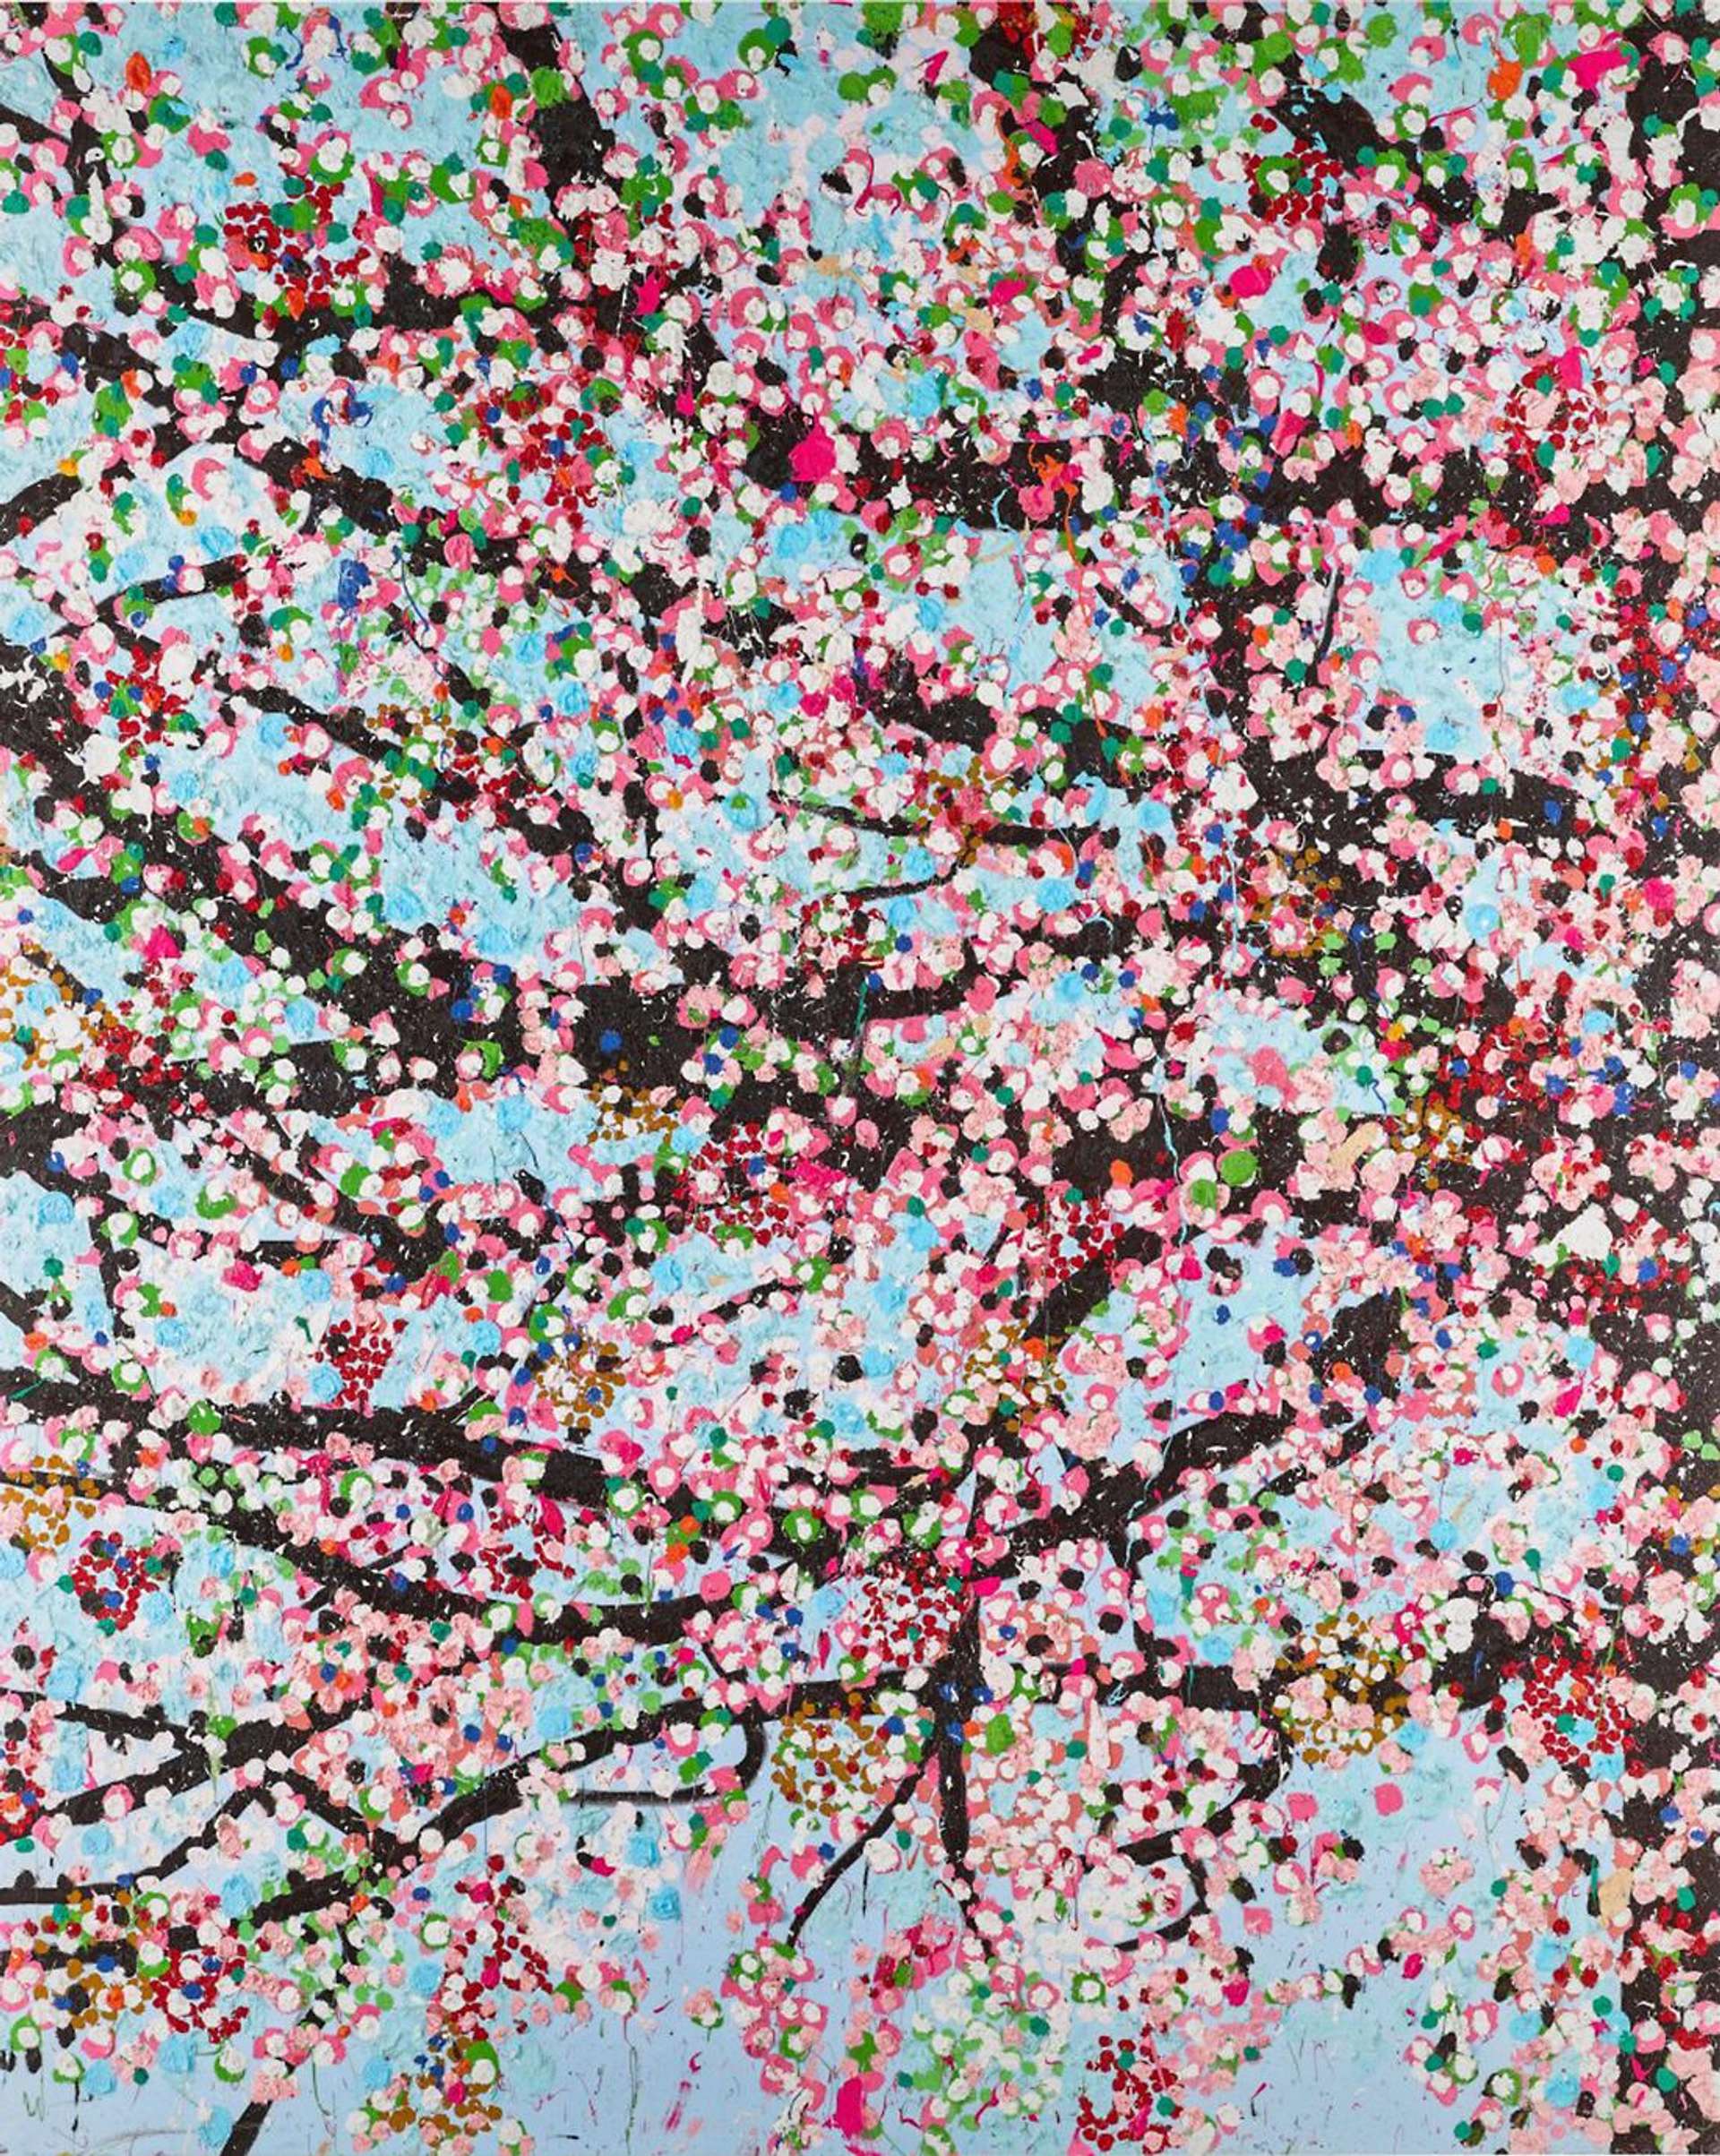 A depiction of a cherry blossom tree against a blue background. The blossoms are delineated with green, pink and white spots.